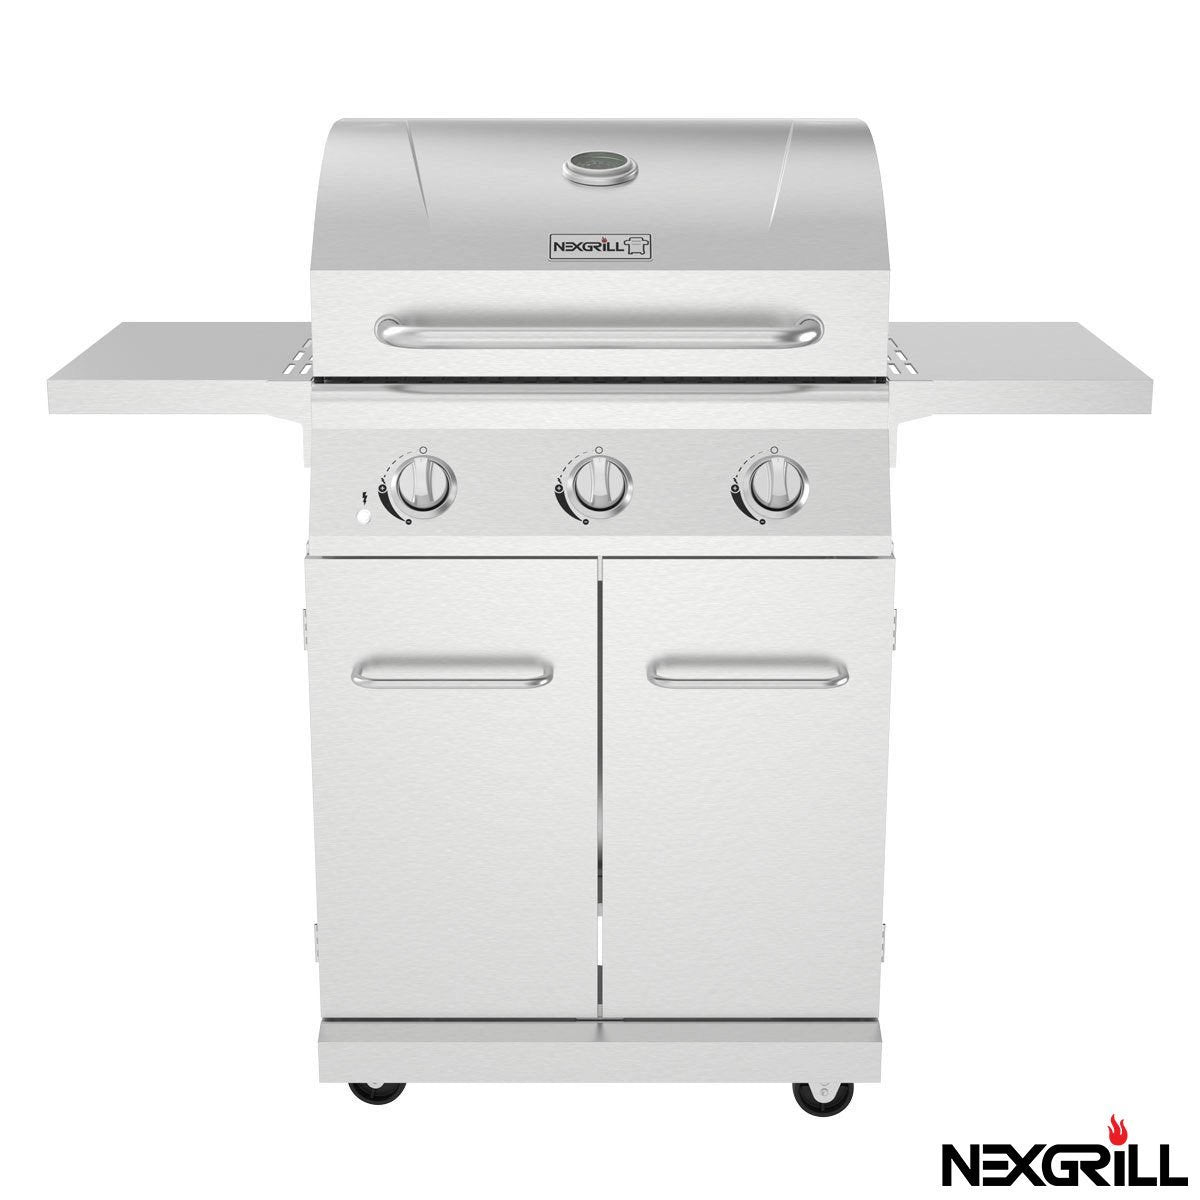 Nexgrill 3 Burner Stainless Steel Gas Barbecue + Cover - Signature Retail Stores